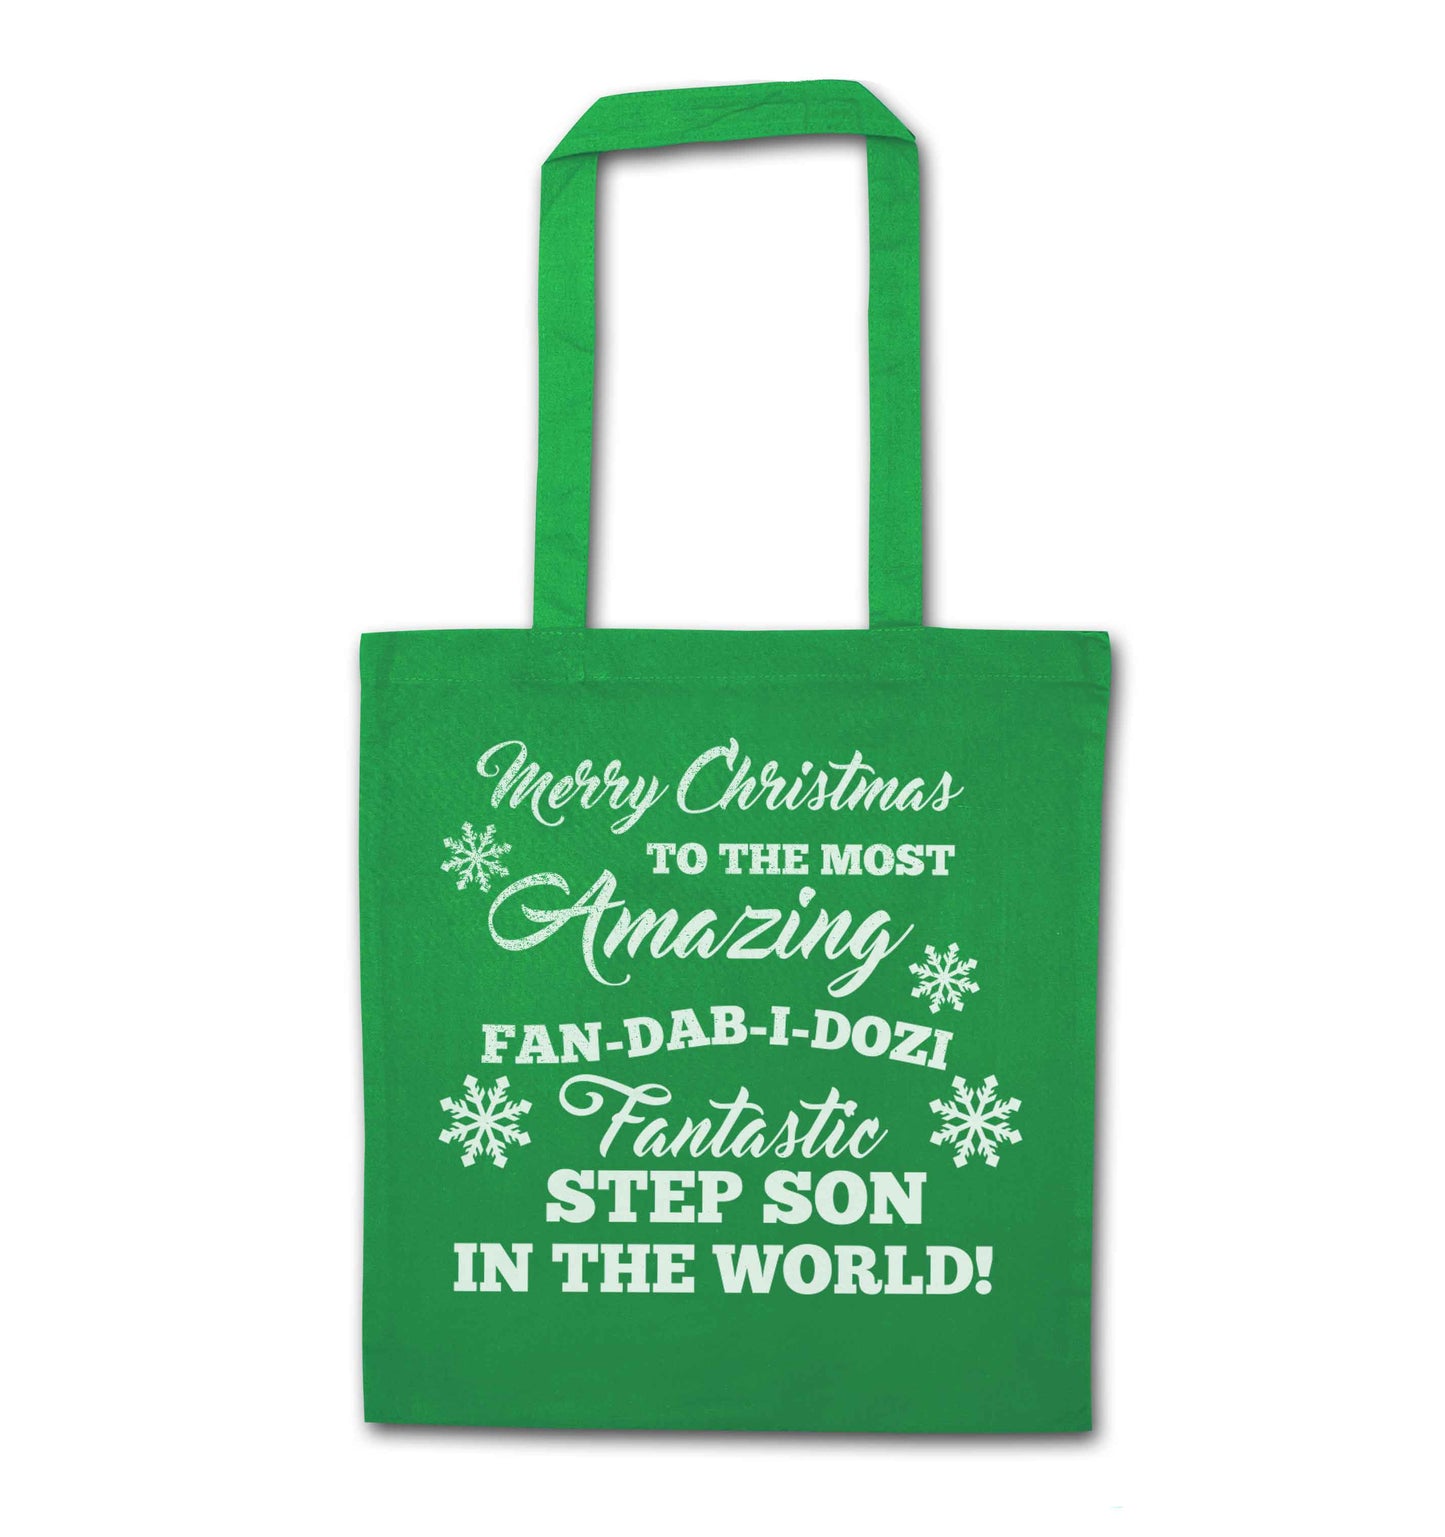 Merry Christmas to the most amazing fan-dab-i-dozi fantasic Step Son in the world green tote bag